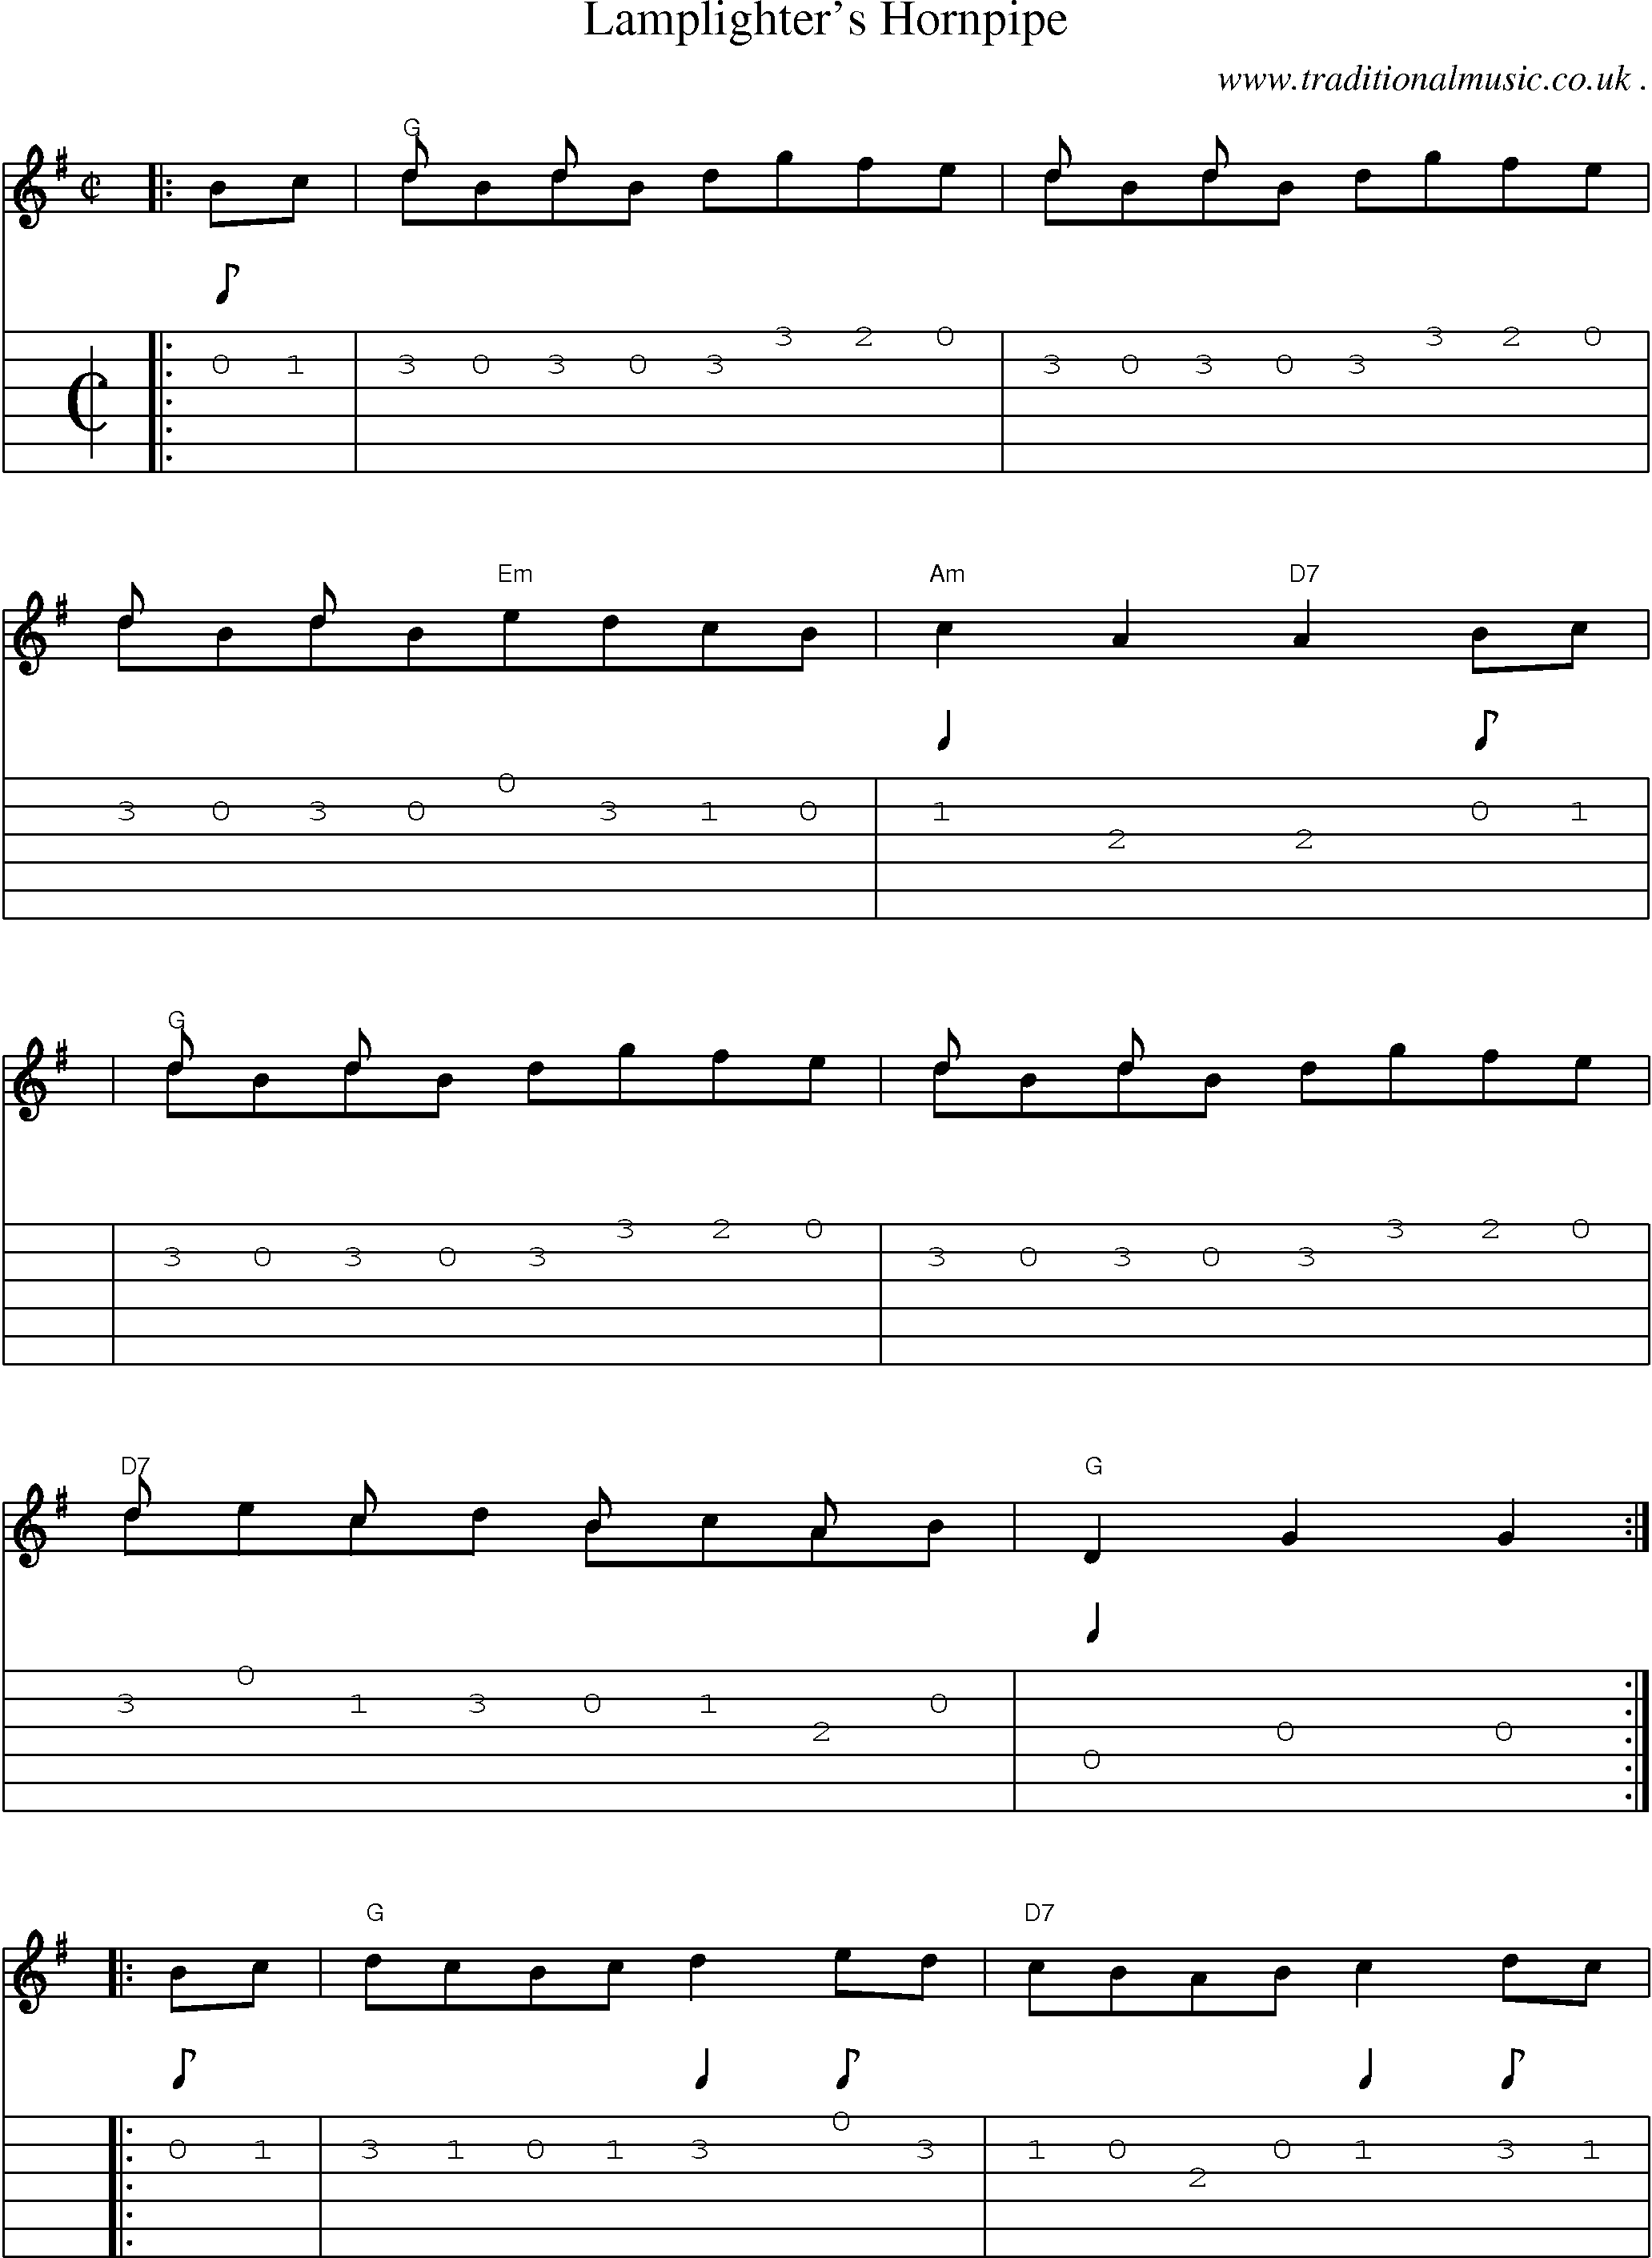 Sheet-Music and Guitar Tabs for Lamplighters Hornpipe